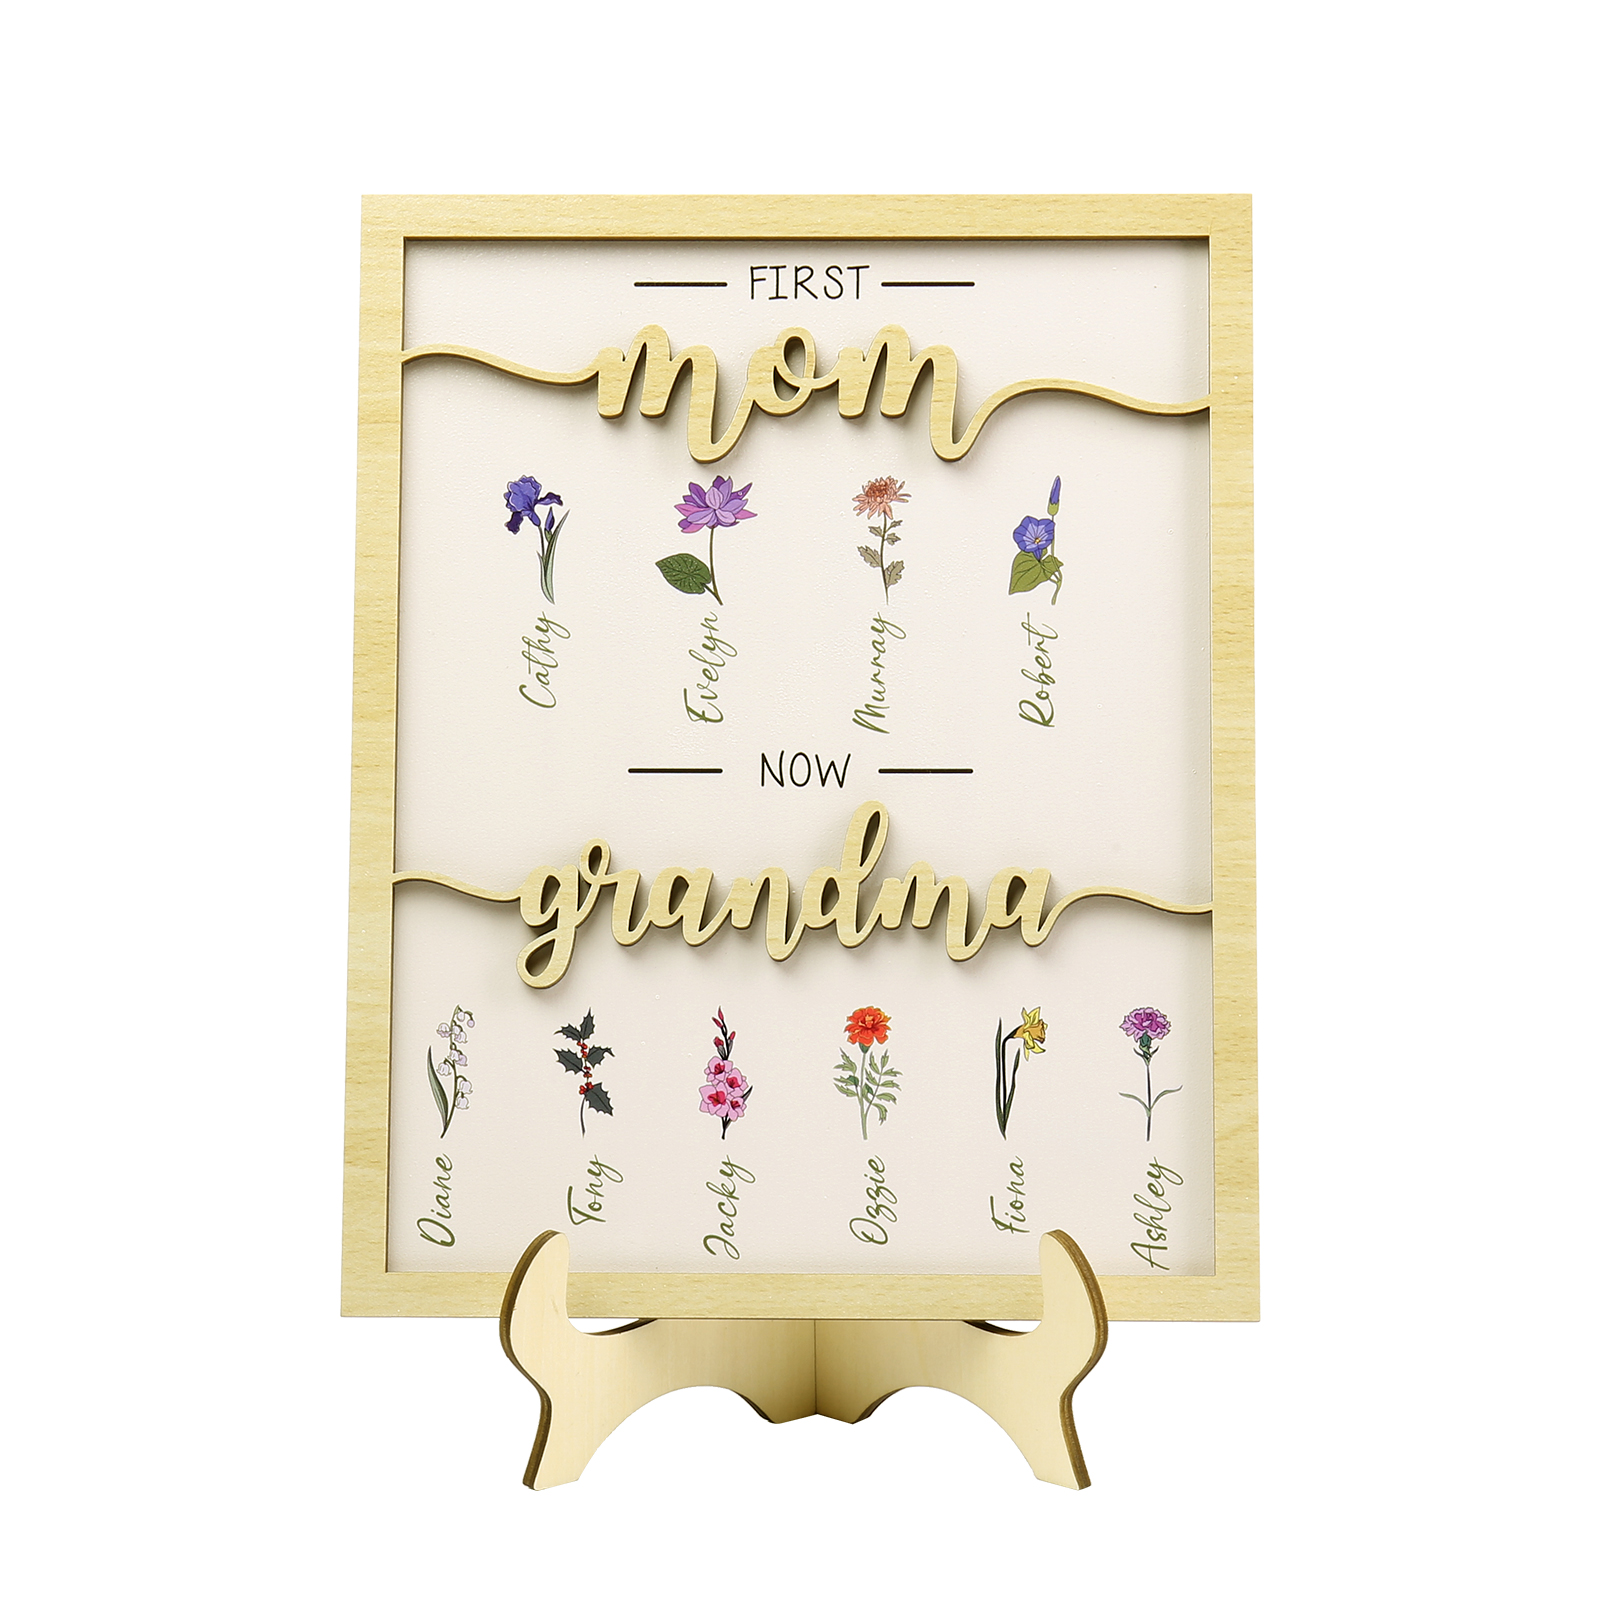 10 Names - Personalized Customized Birth Flower Home Frame Wooden Decoration for Mom/Grandma